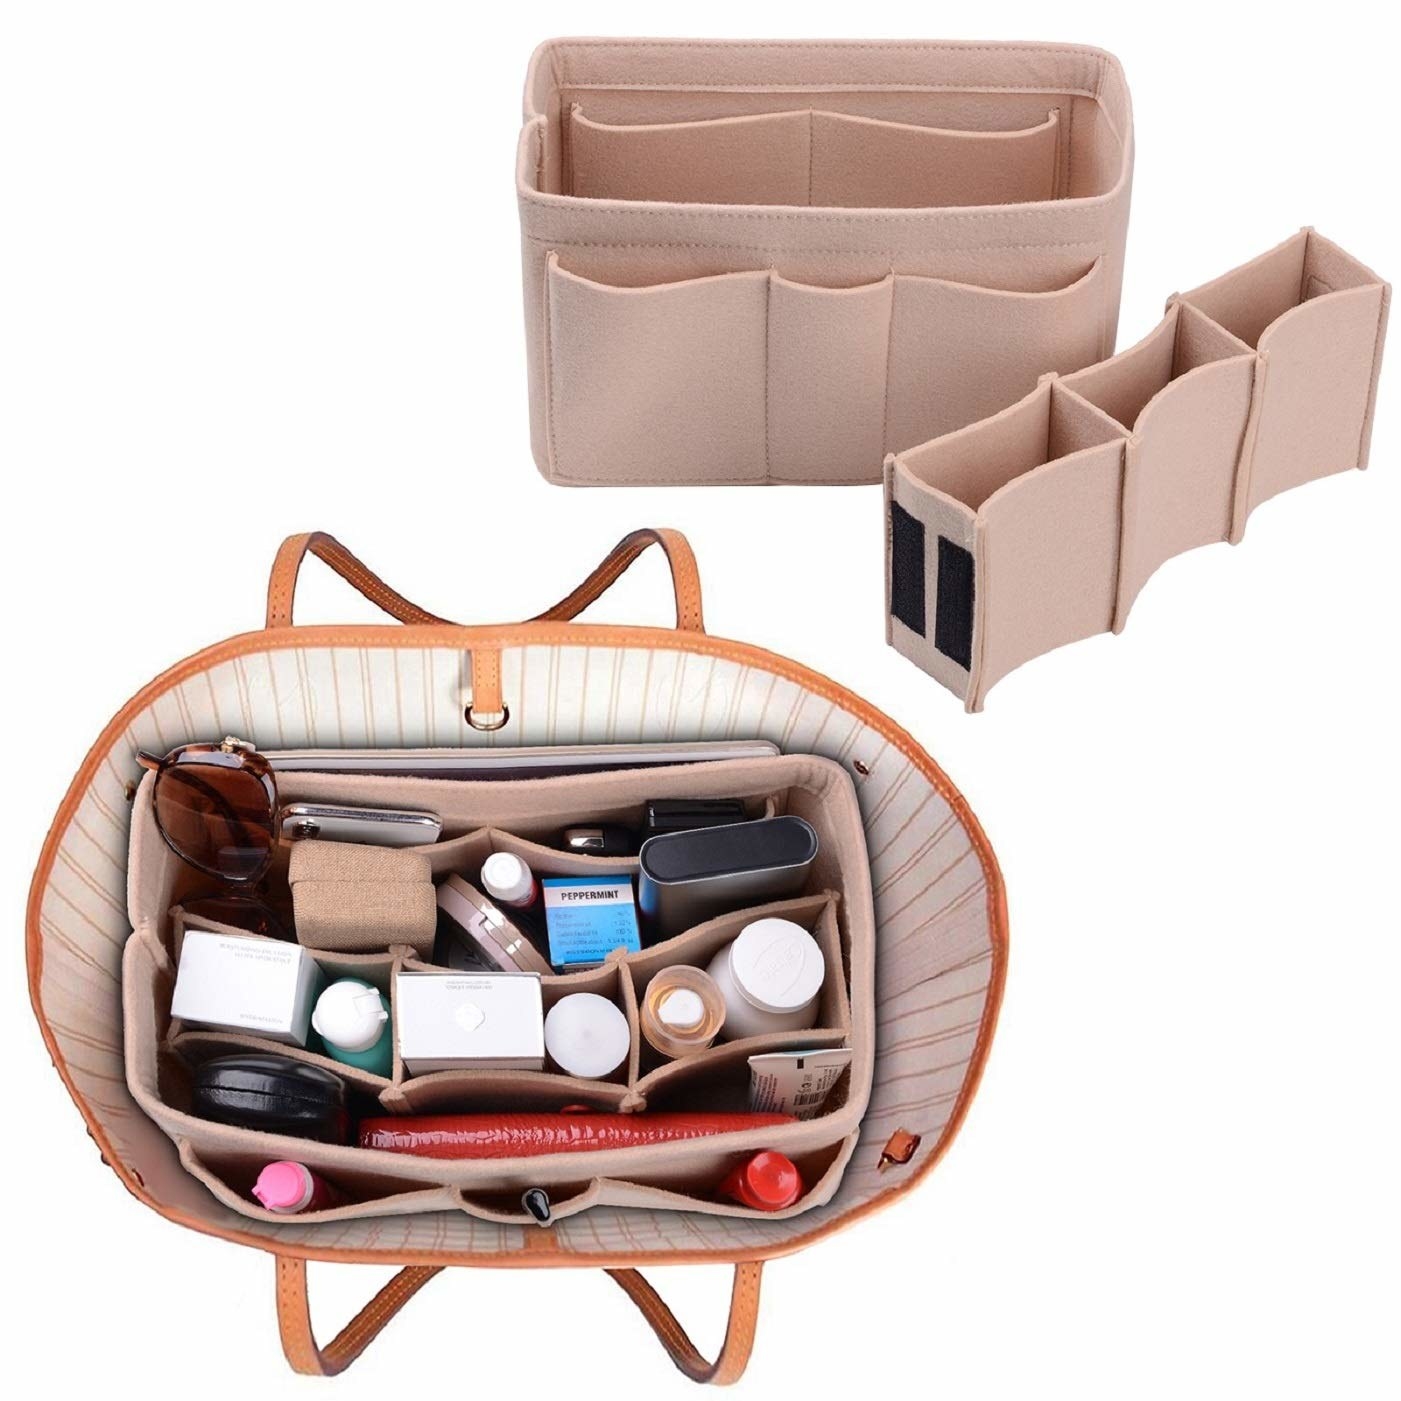 The felt organizer in pink from the front and side, and also shown organizing items in a tote